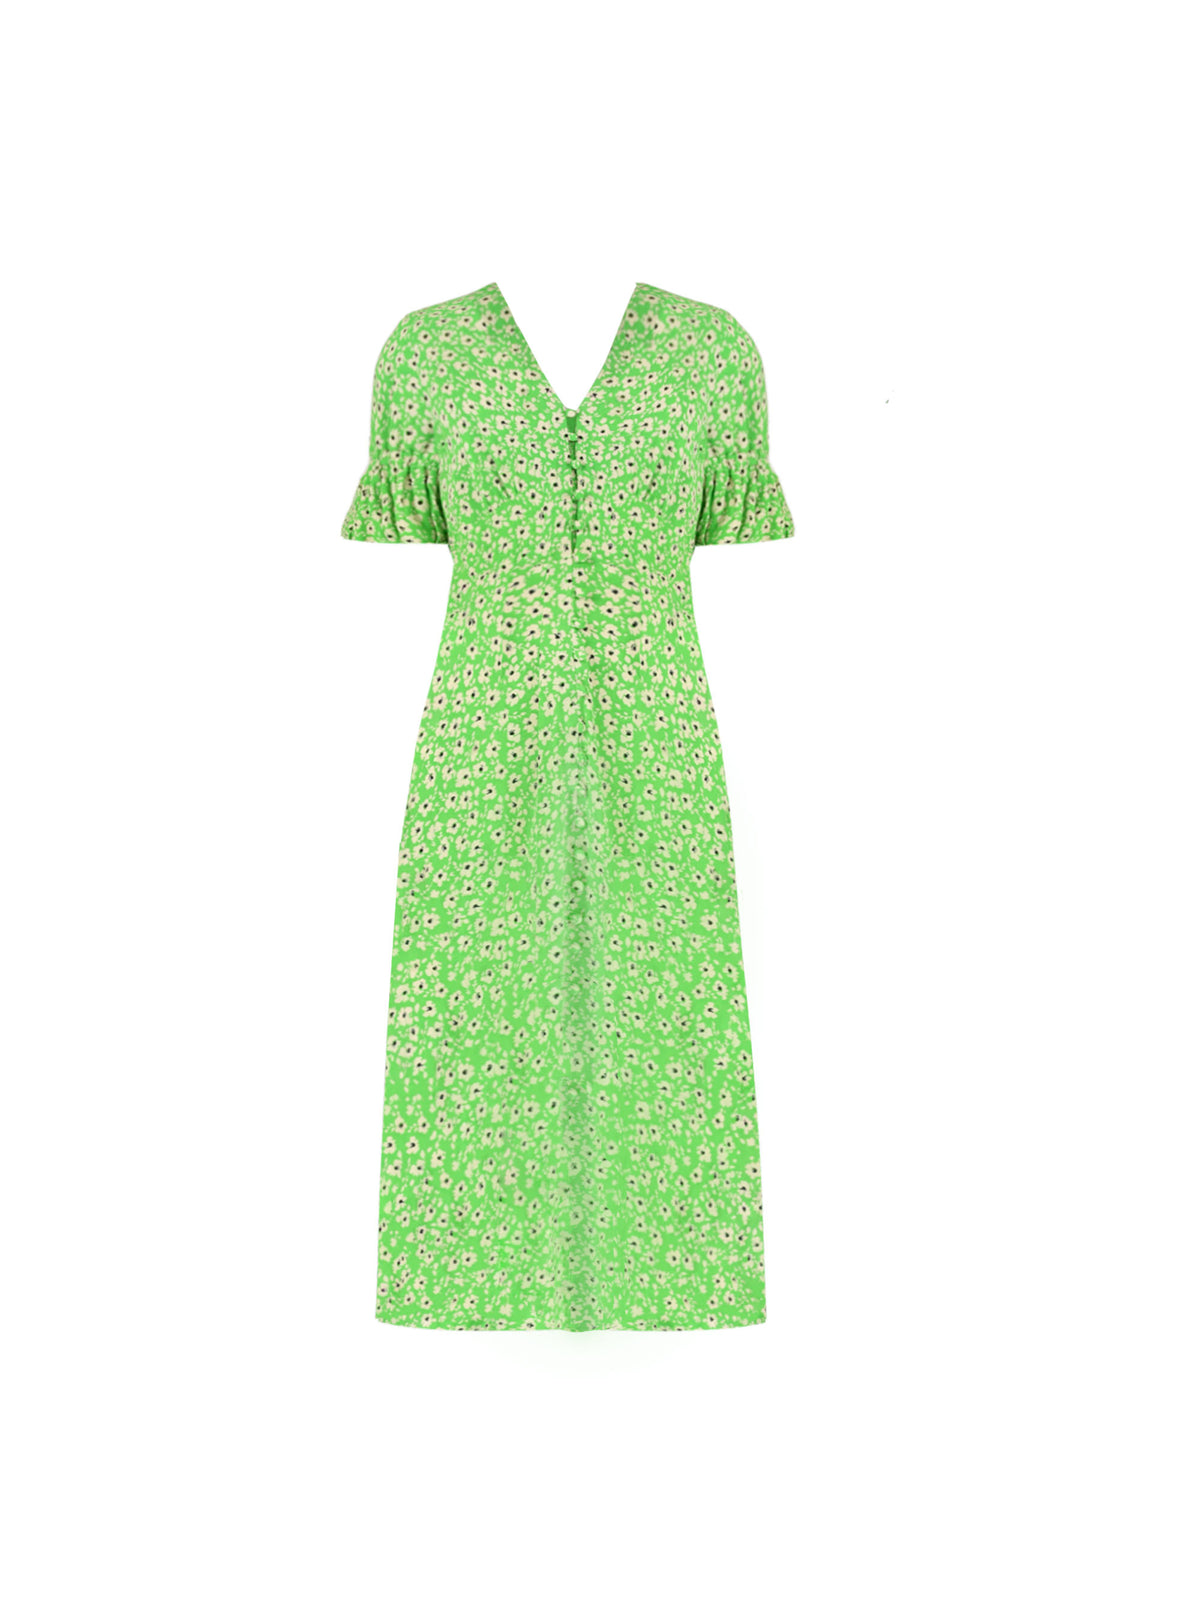 Green Ditsy Floral Button Front Dress